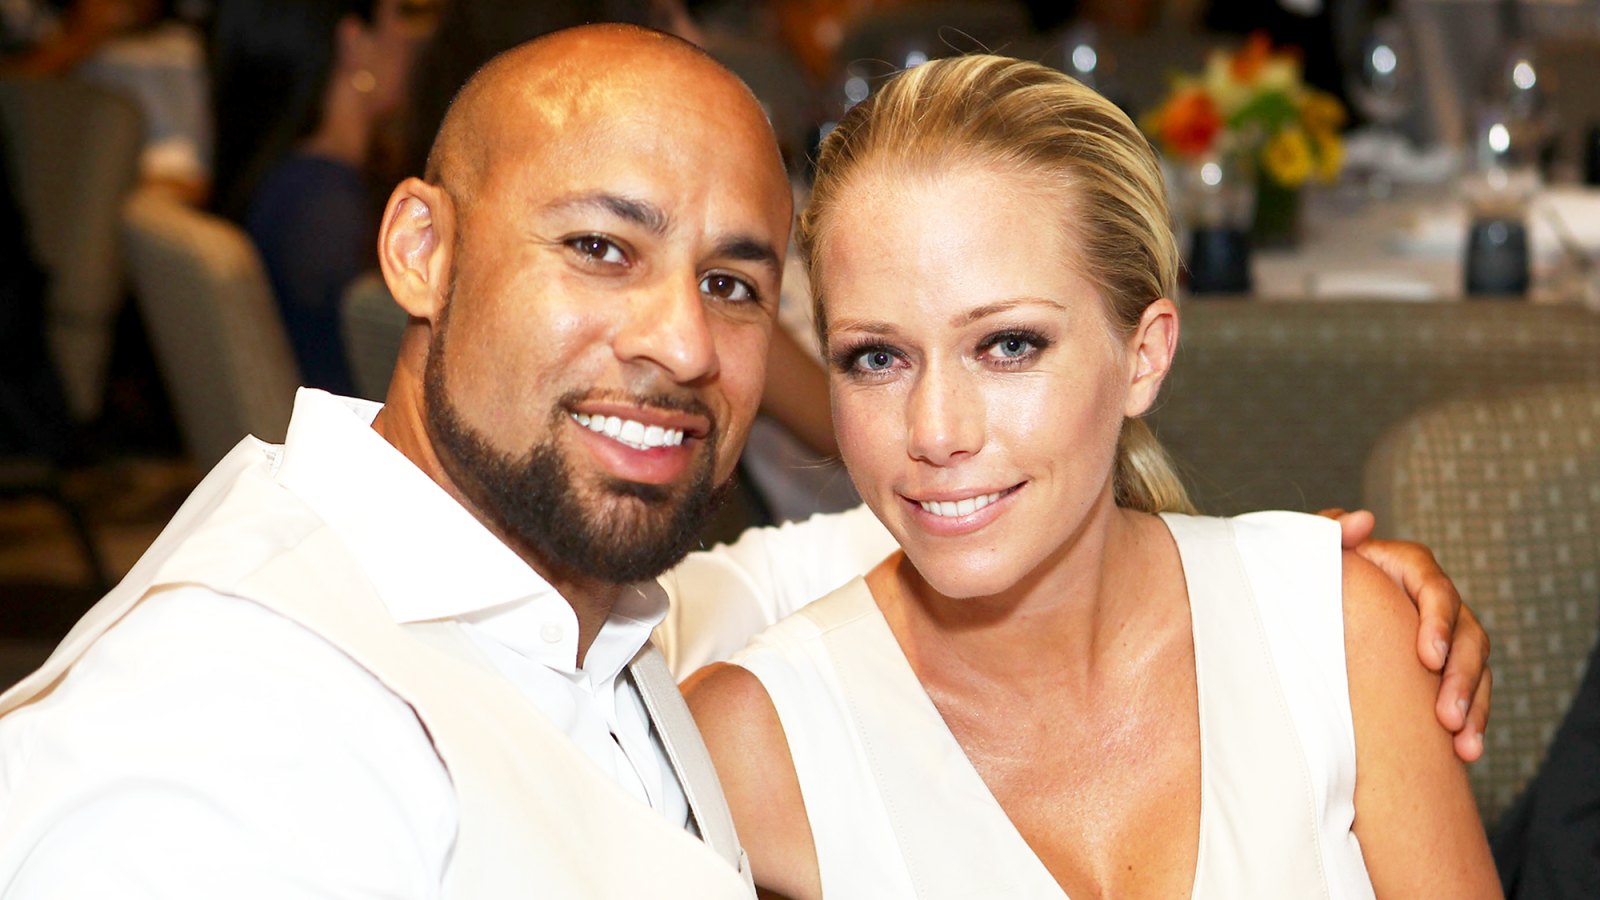 Hank Baskett and Kendra Wilkinson attended the 4th Annual Champions For Choice In Education Pre-ESPY Event at Luxe Hotel in Los Angeles, California.